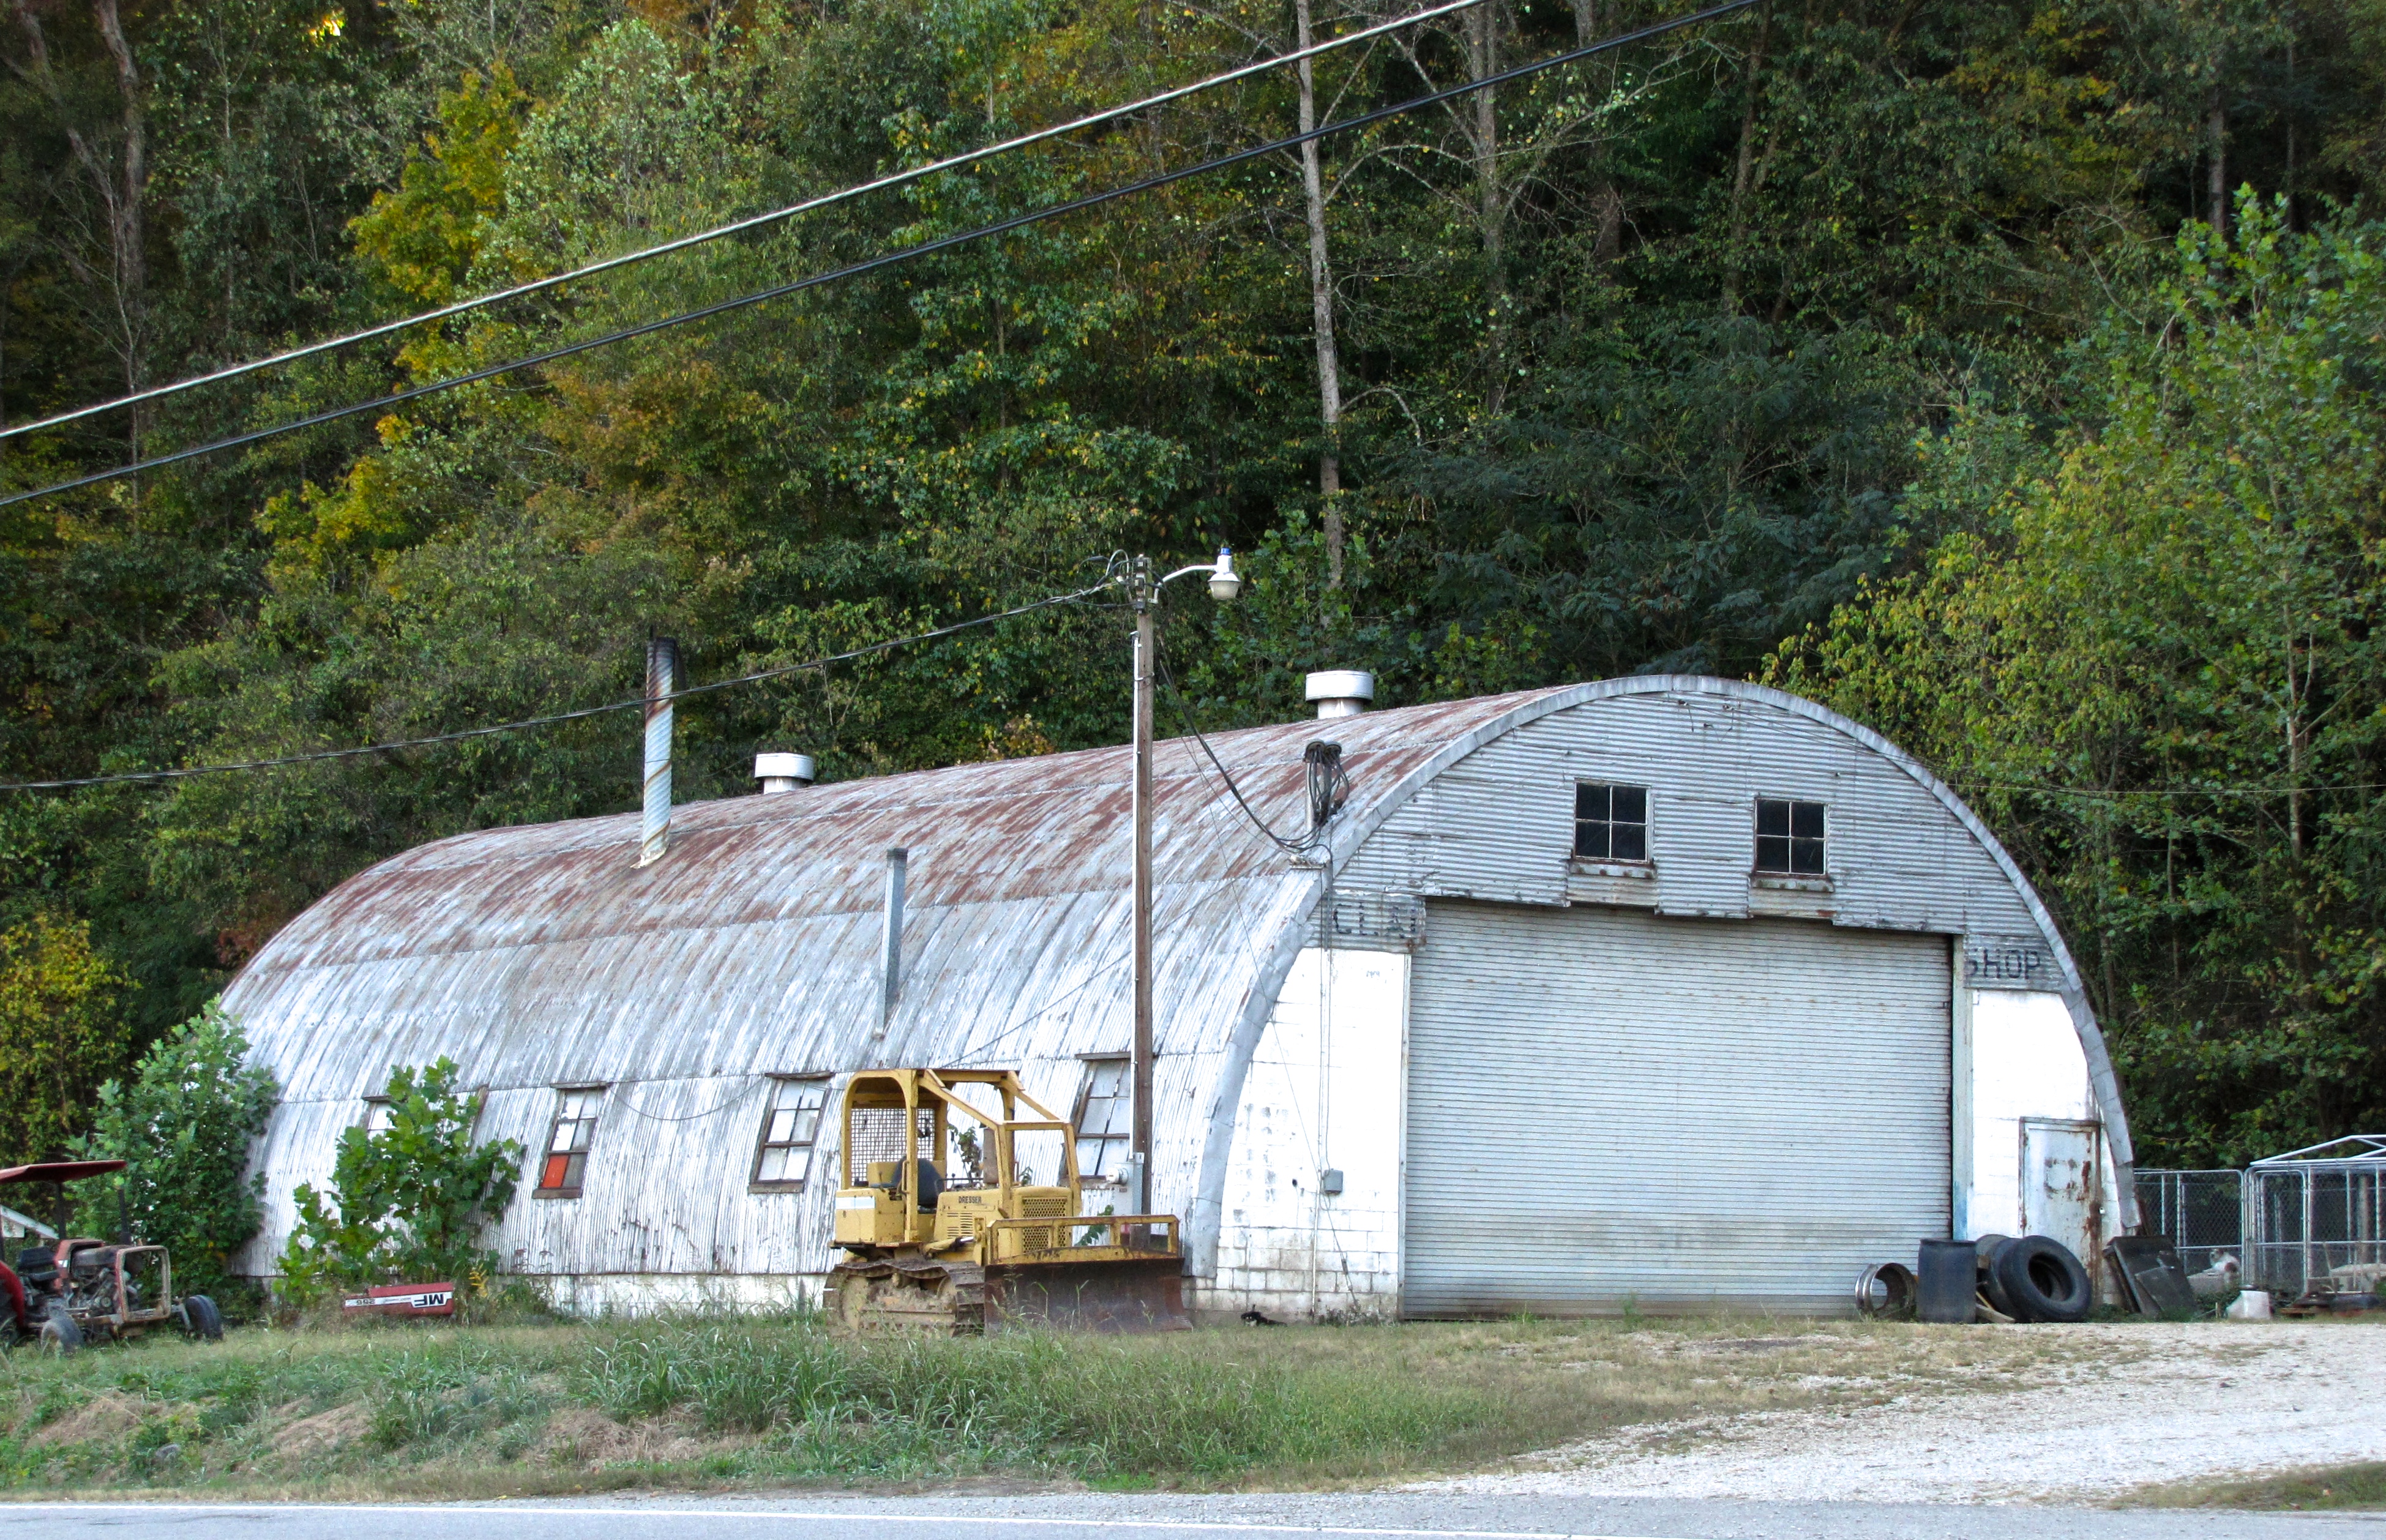 quonset hut in Privacy Policy, CO